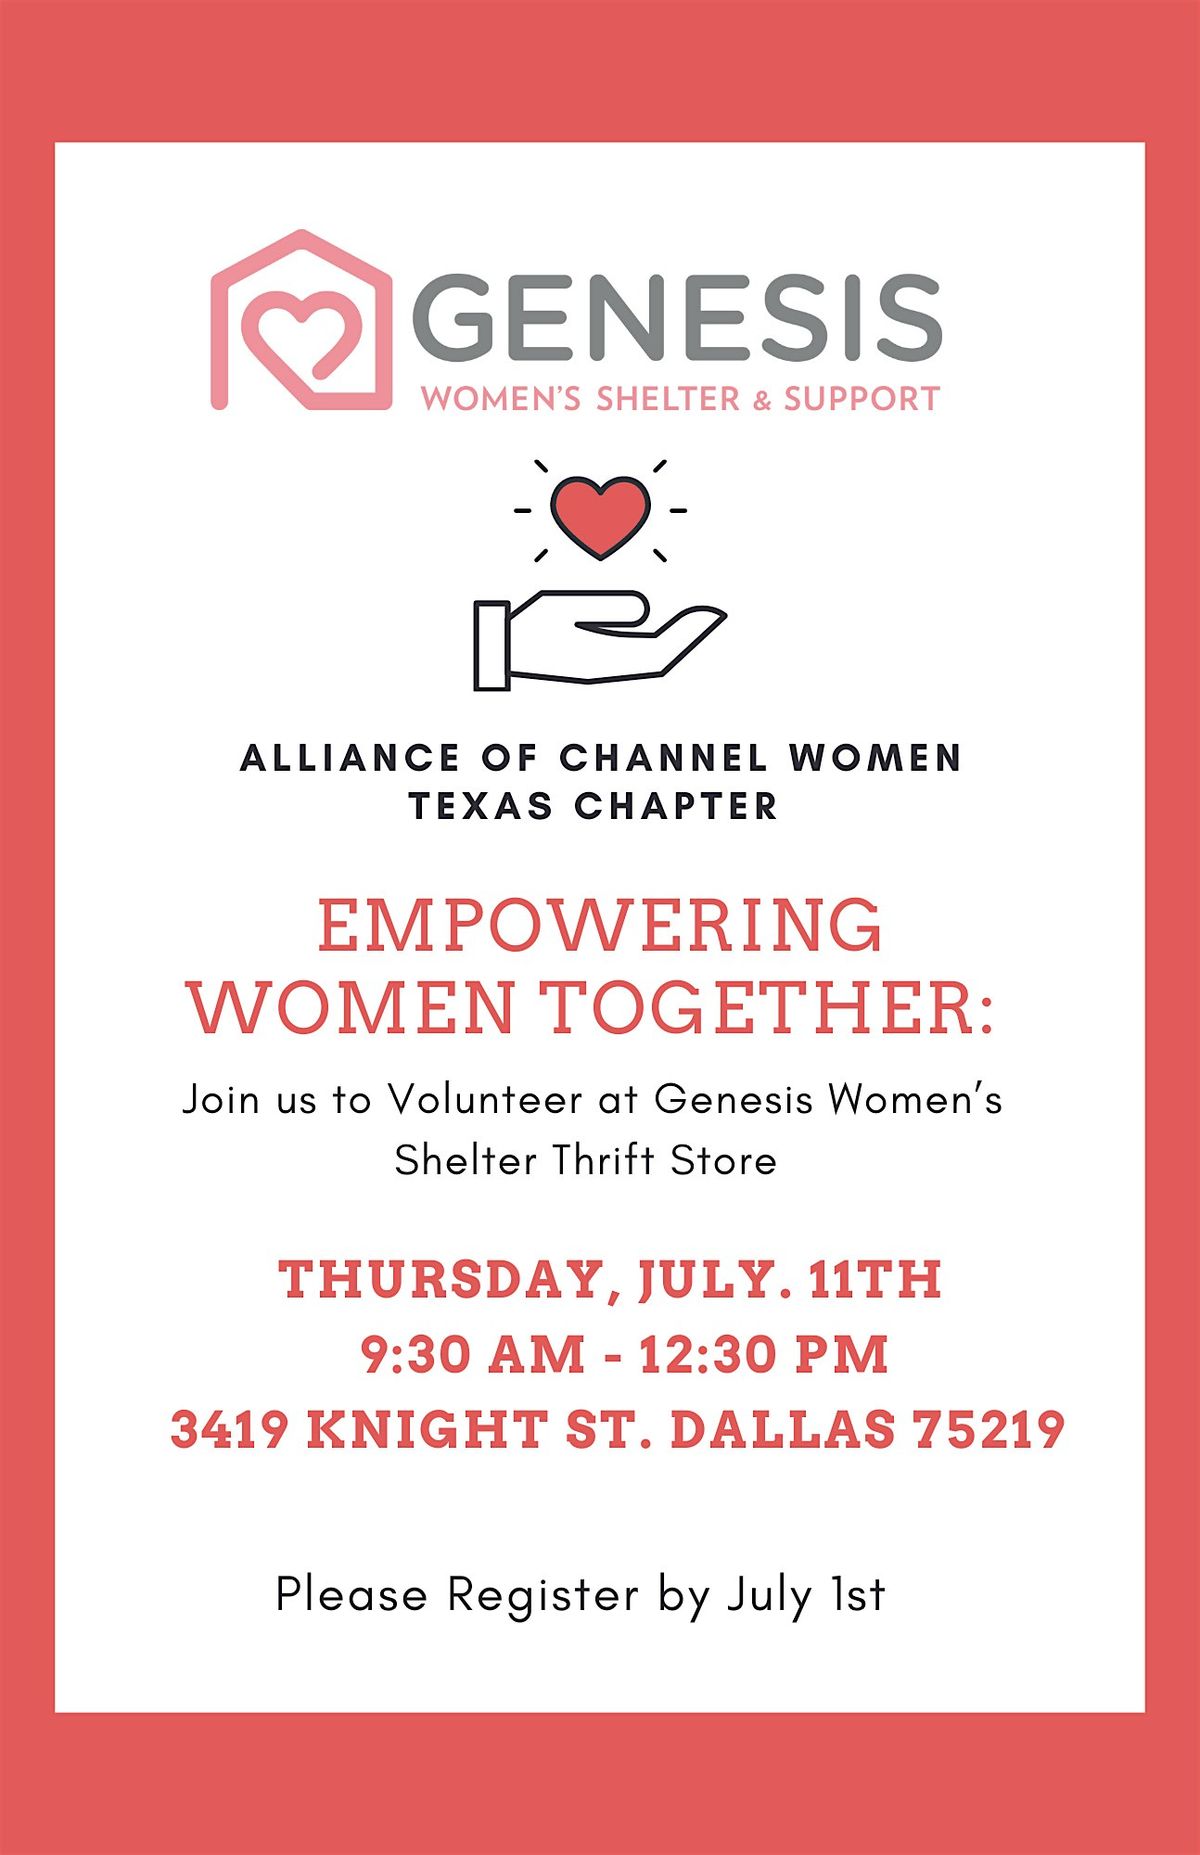 Dallas ACW July Event: Empowering Women Together